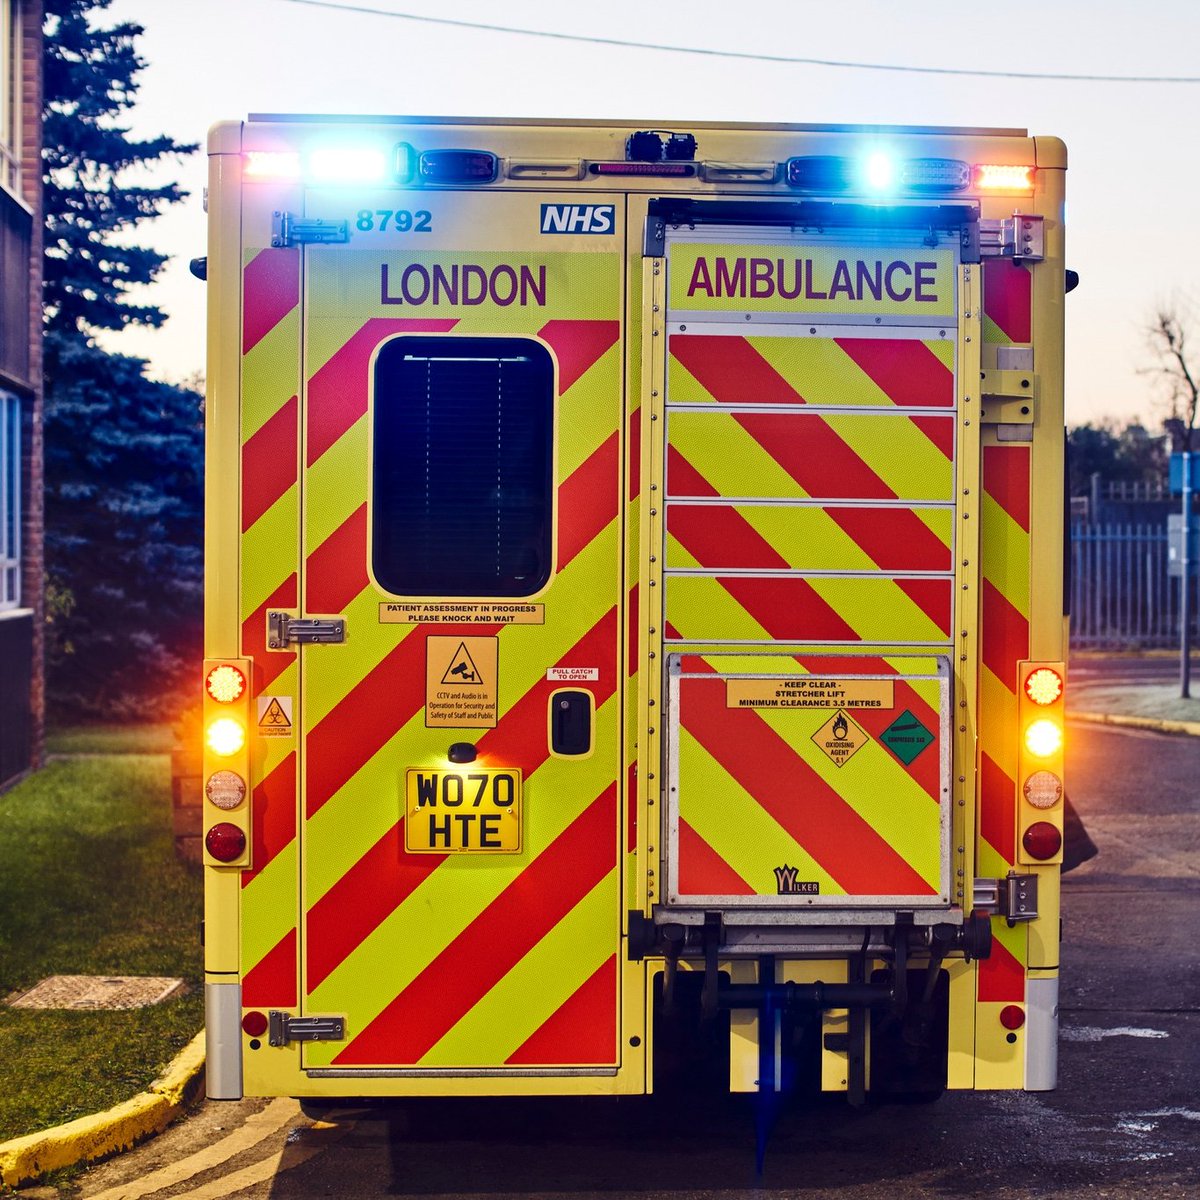 🚨 Our 999 services are very busy at the moment as we enter the weekend 🚨 Please help us save lives by only using 999 if it's a life-threatening emergency. 111.nhs.uk can tell you what to do next if you need urgent help right now ✅